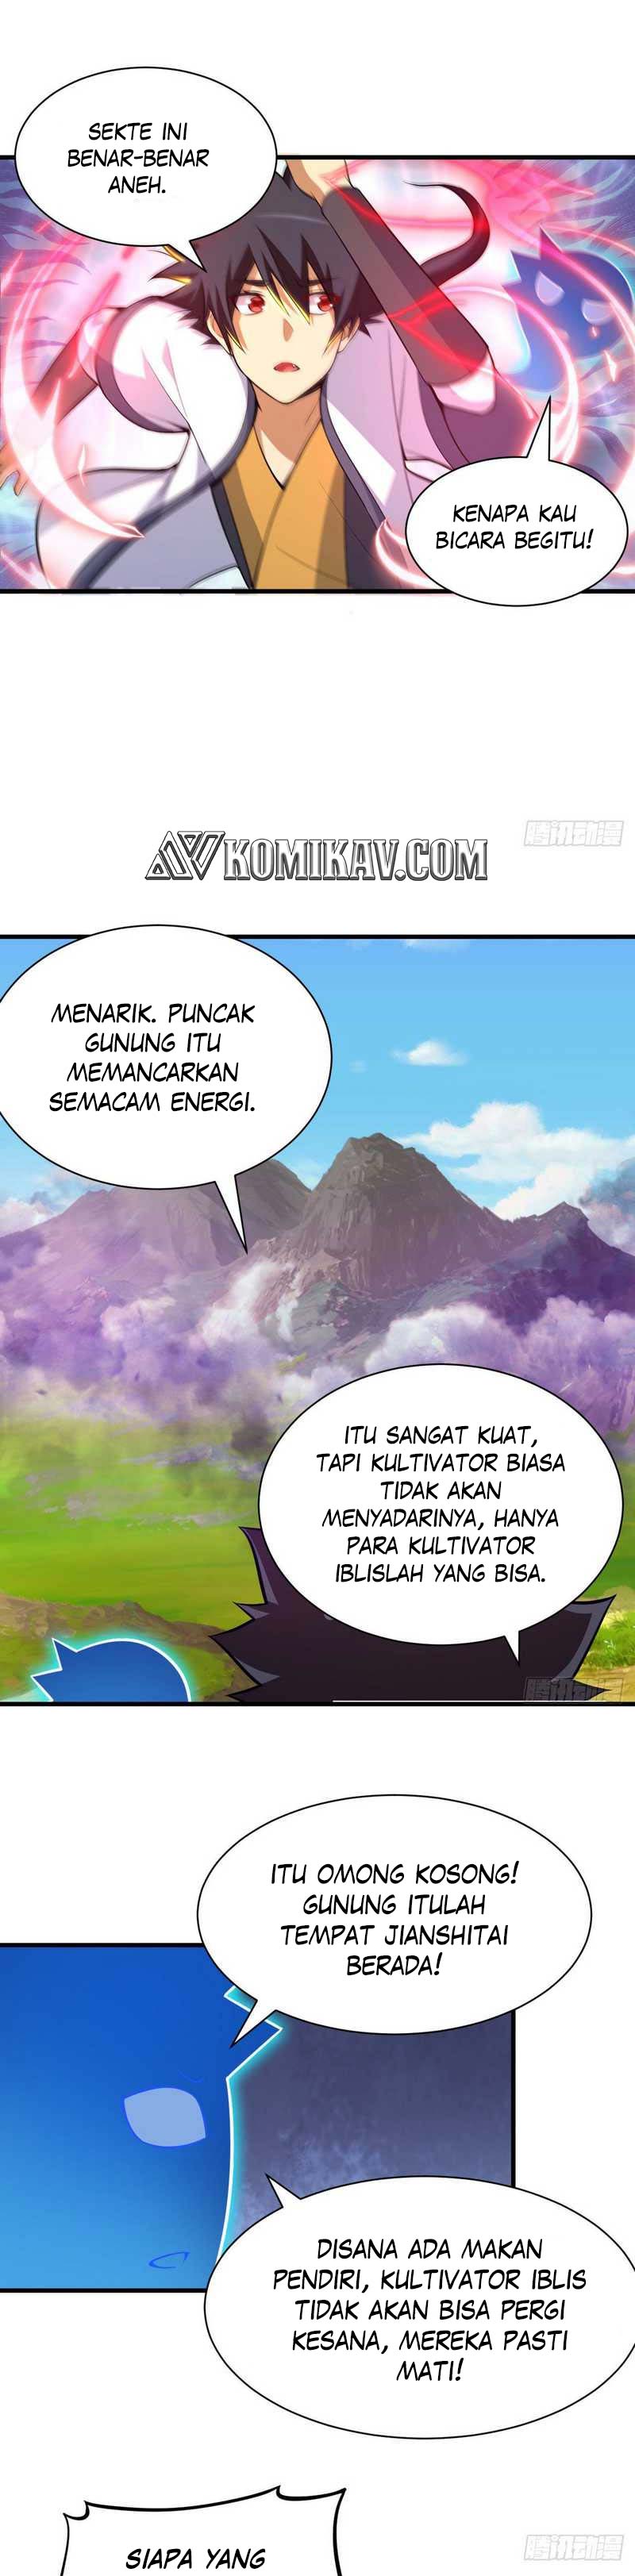 Dilarang COPAS - situs resmi www.mangacanblog.com - Komik i just want to be beaten to death by everyone 083 - chapter 83 84 Indonesia i just want to be beaten to death by everyone 083 - chapter 83 Terbaru 13|Baca Manga Komik Indonesia|Mangacan